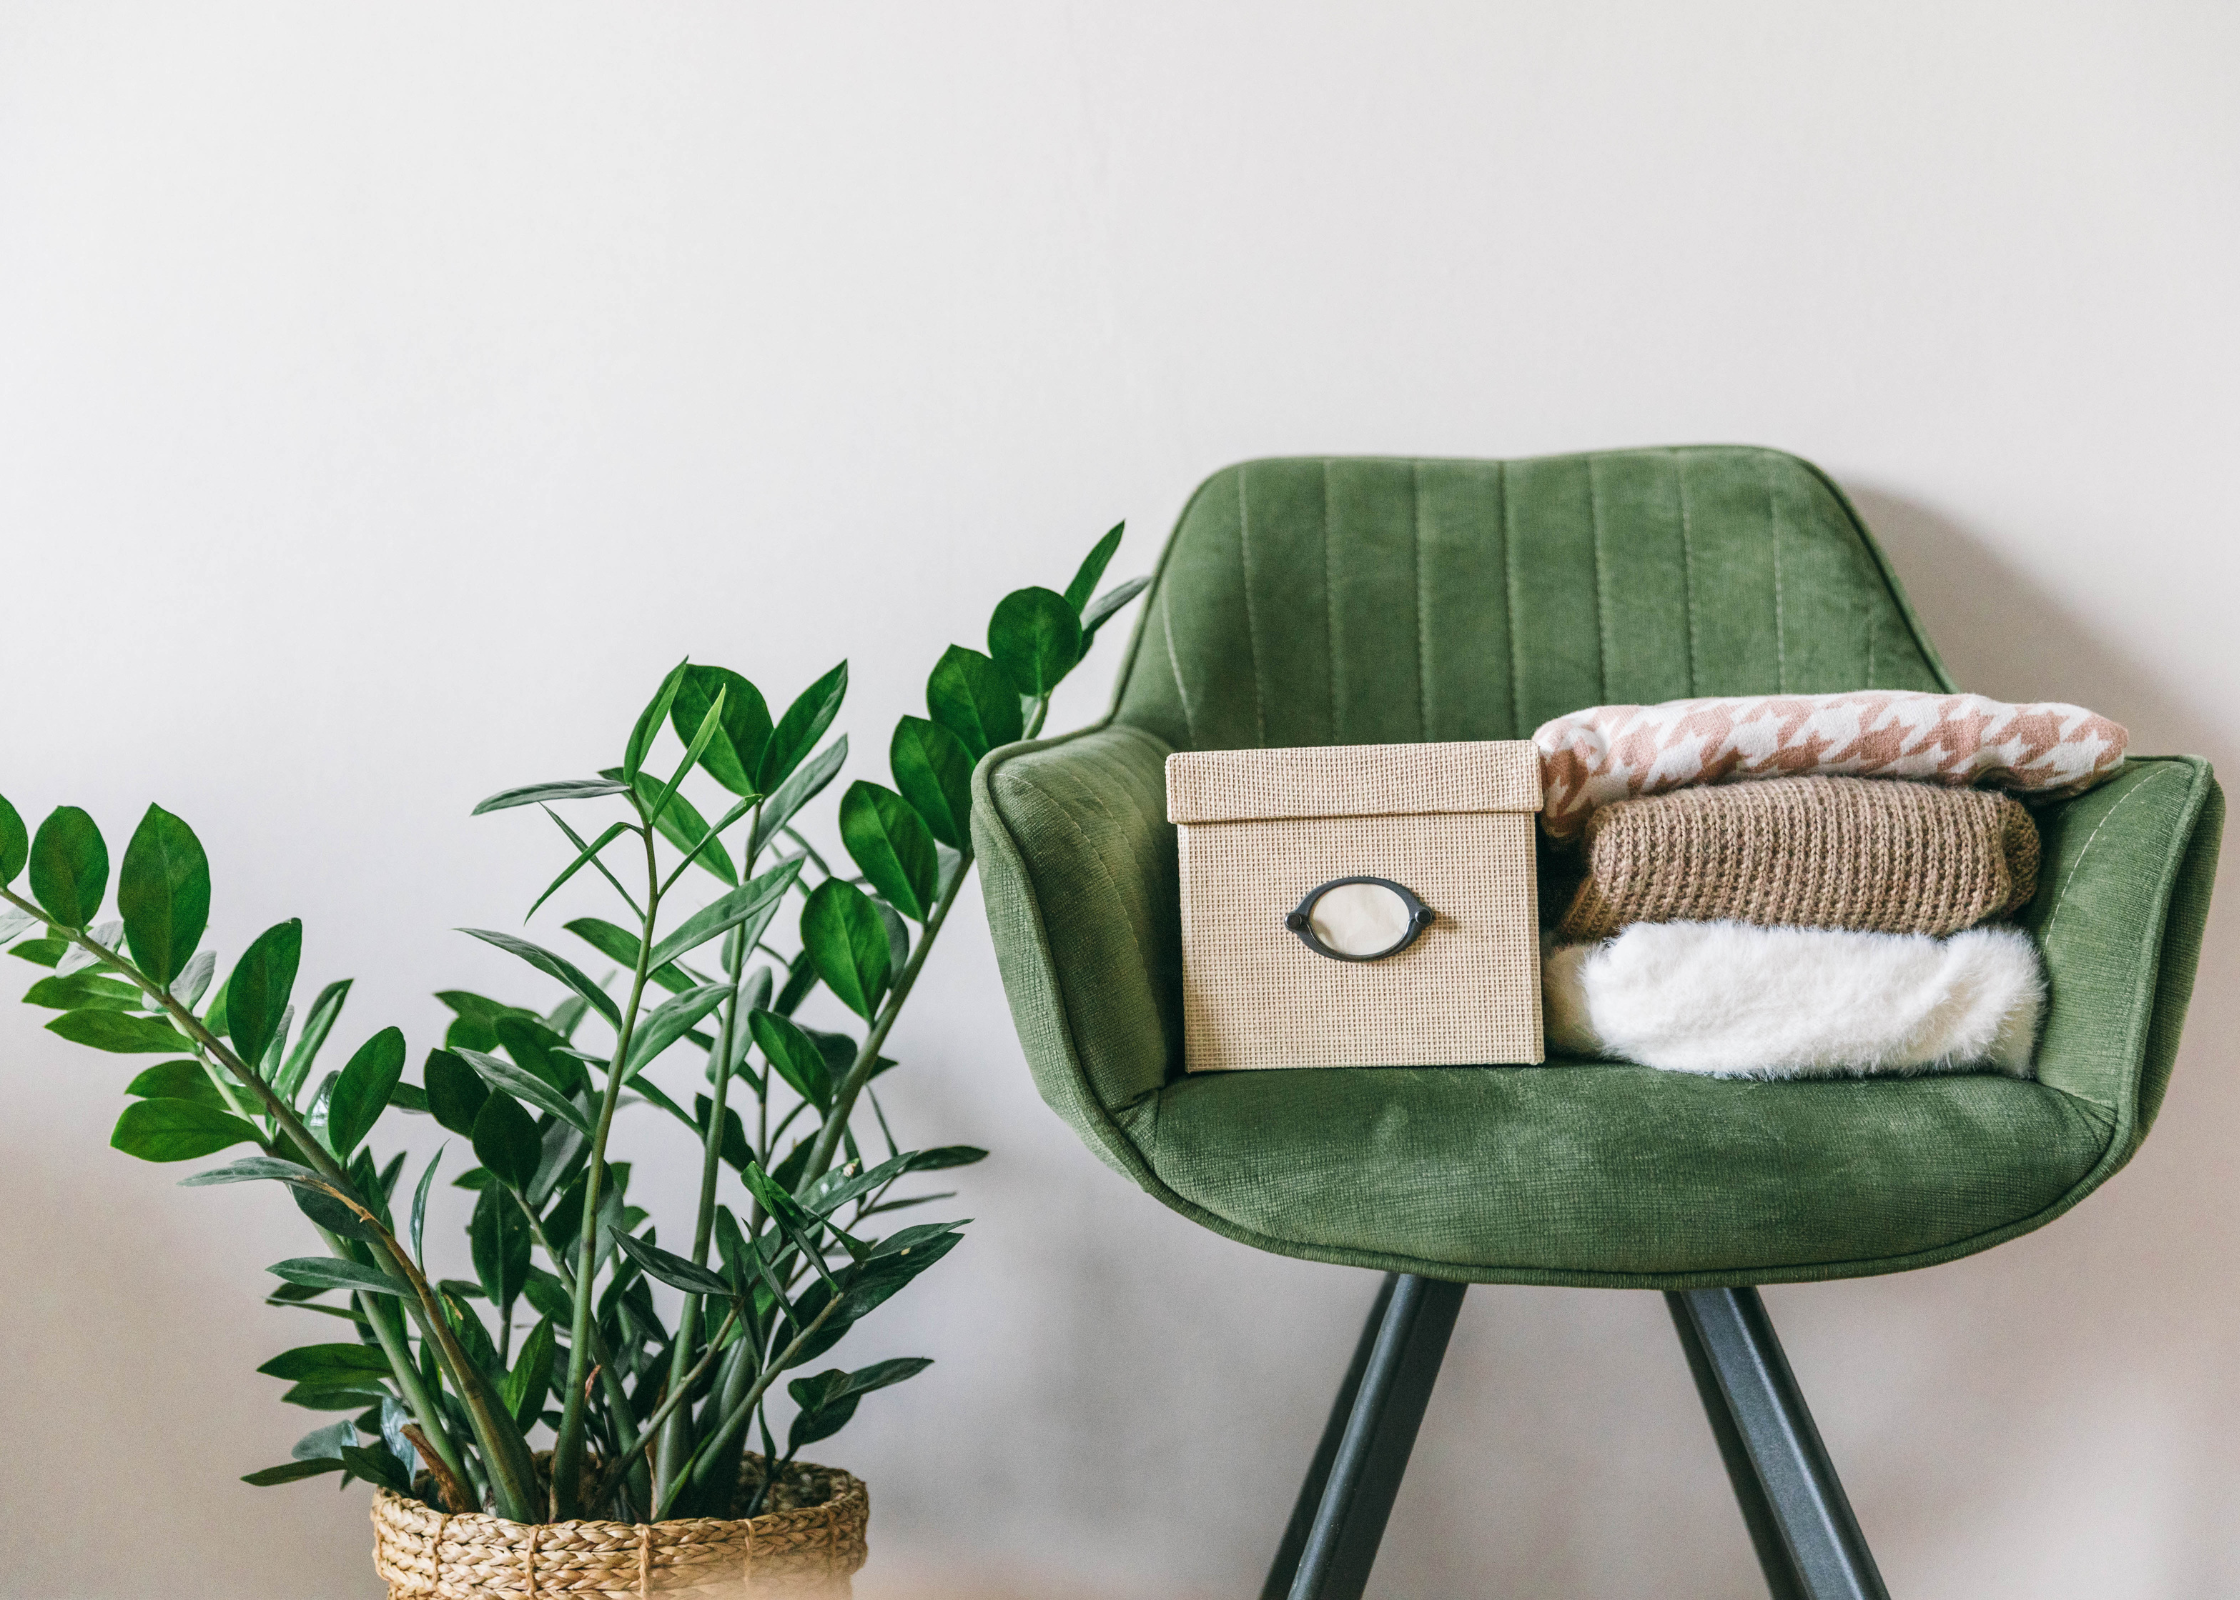 green chair with plant. Spring decor ideas. decorating for spring. decor for spring. How to update your home for spring. resfresh home. get home spring ready. how to transition your home from winter to spring